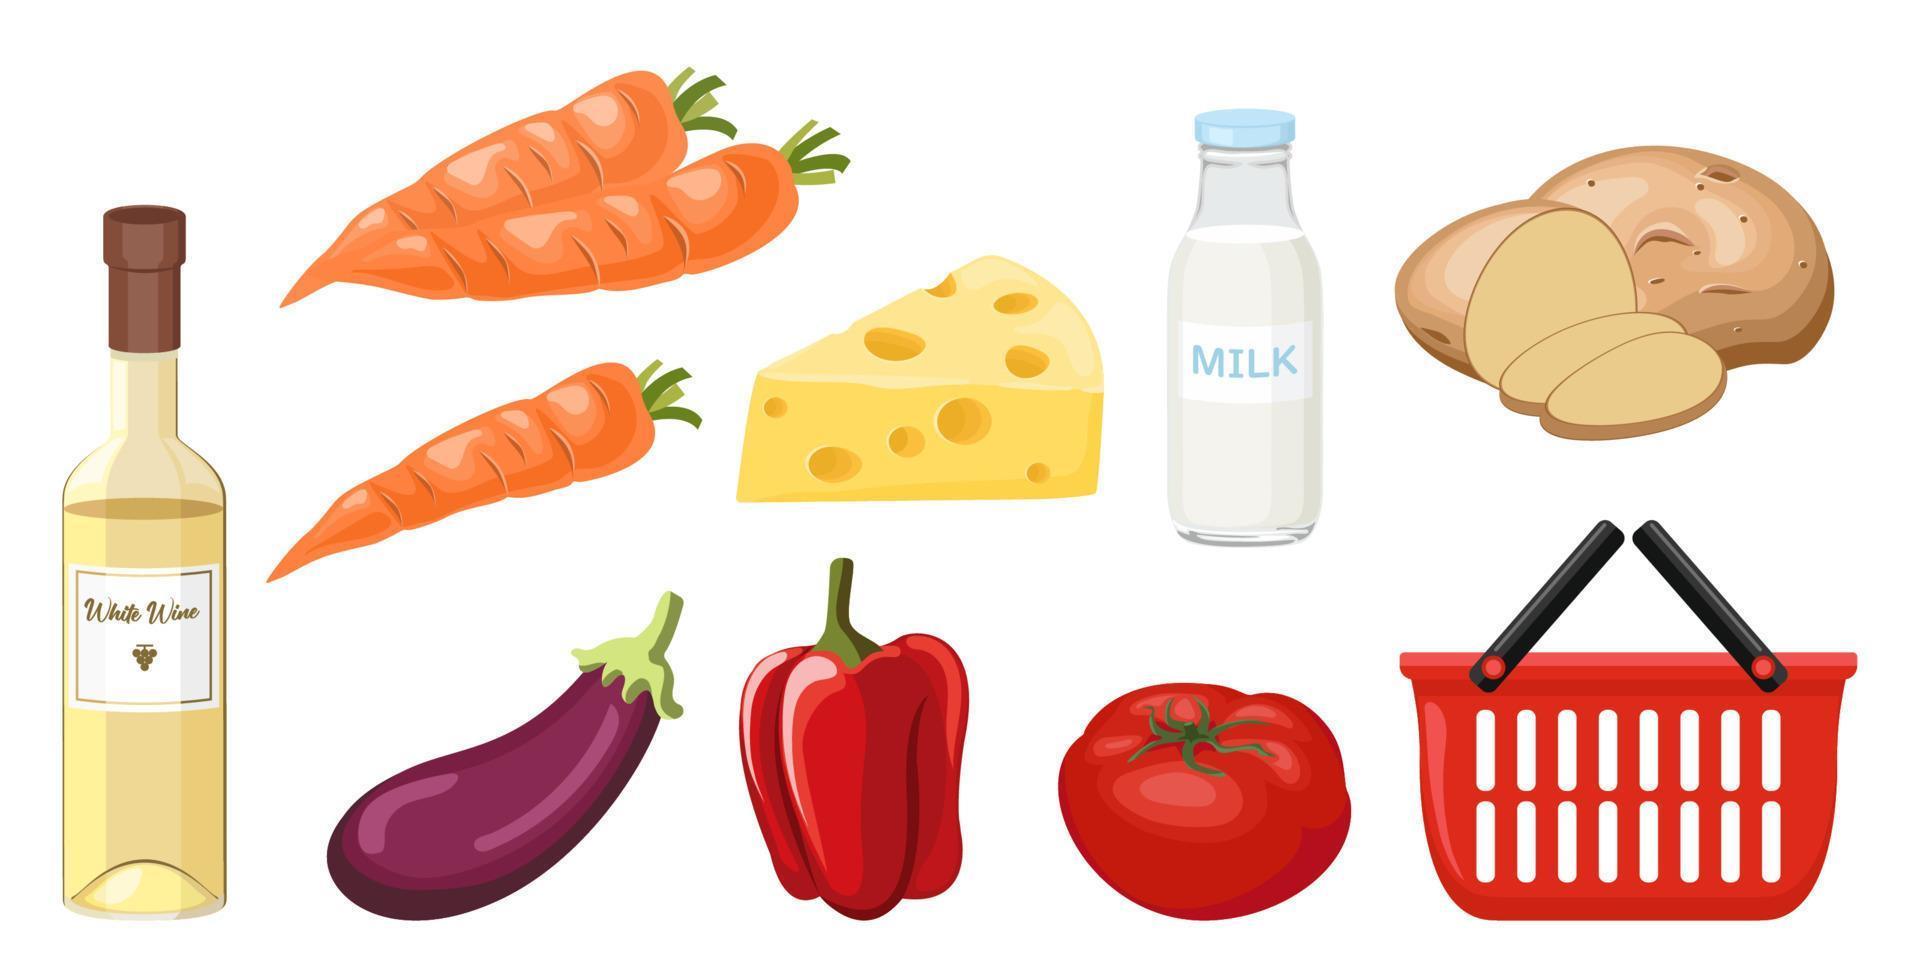 Collection set of food objects vegetable carrot tomato potato eggplant white wine milk cheese vector